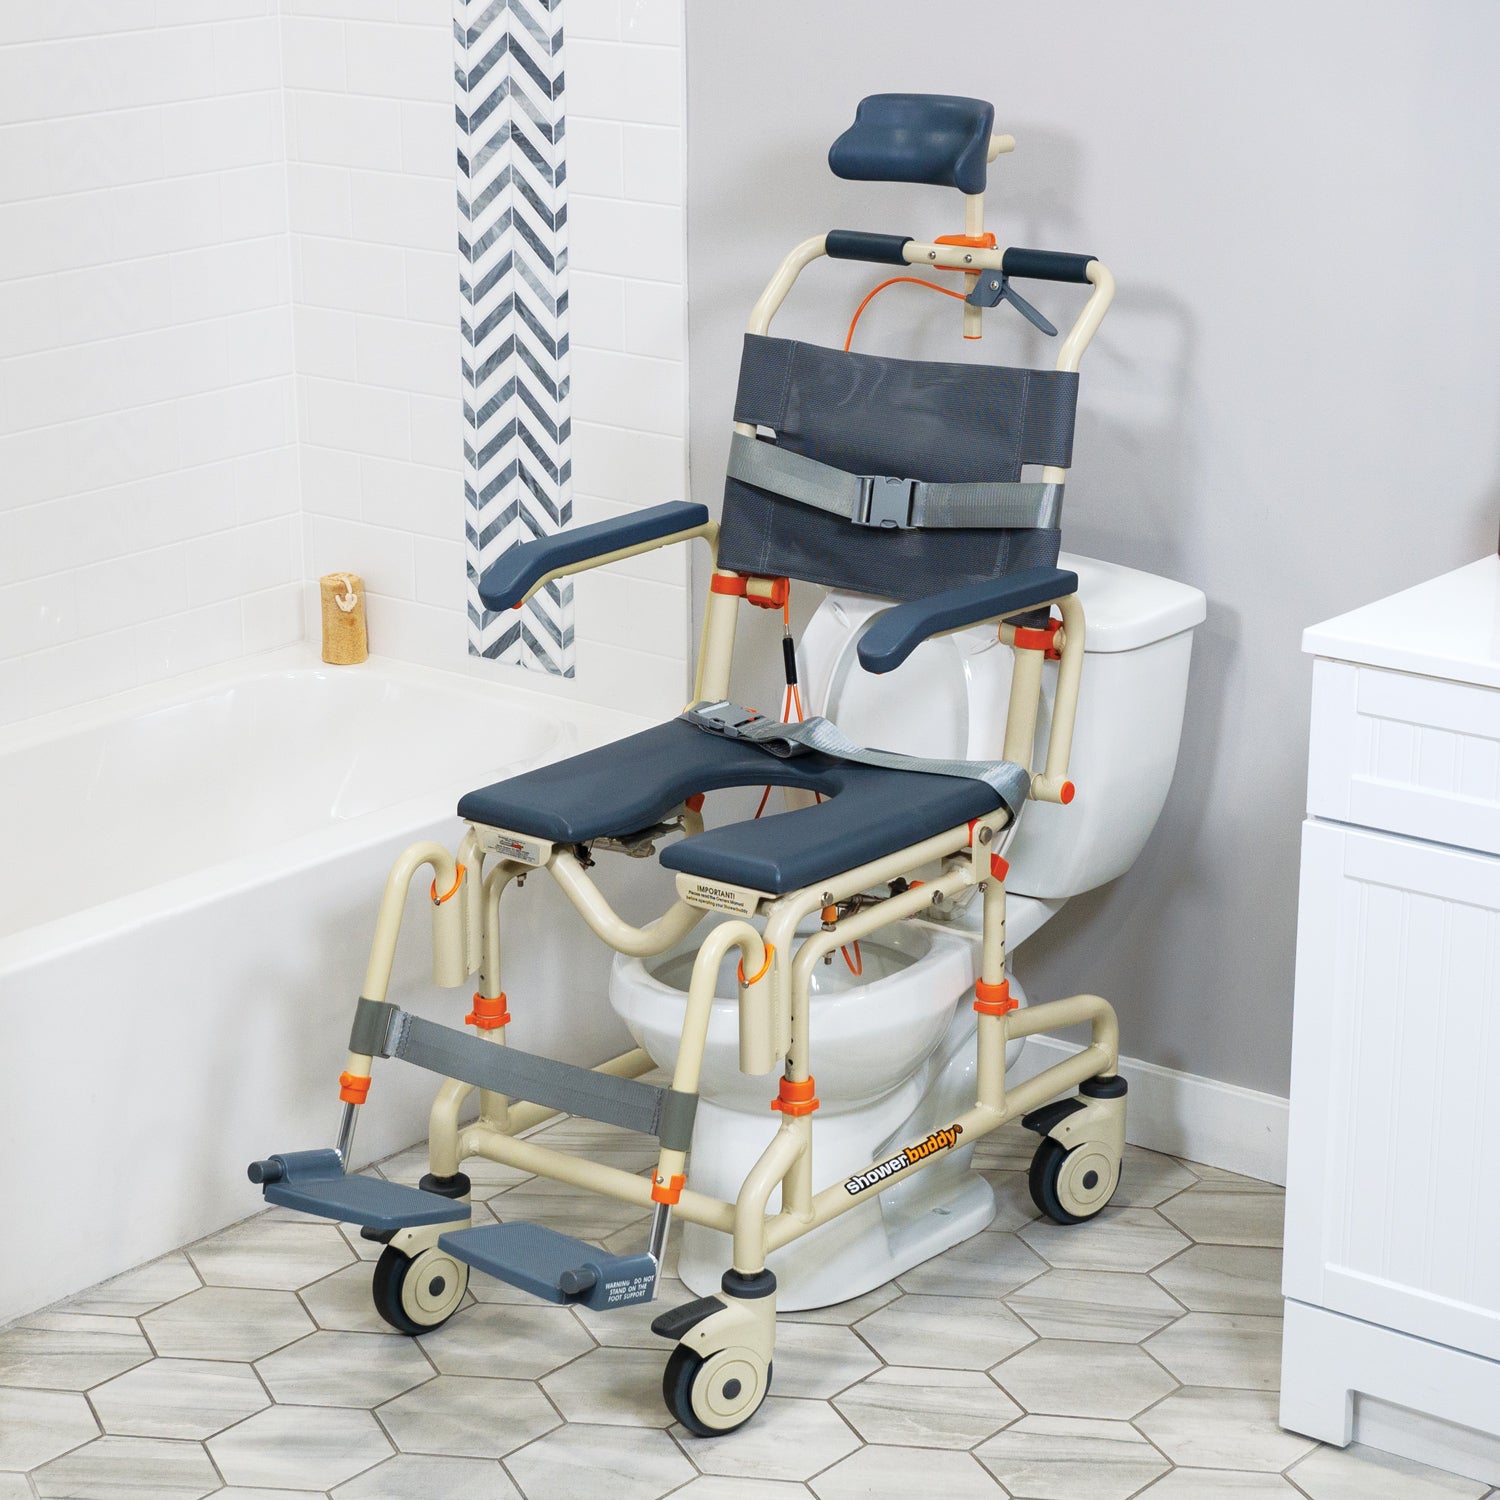 ShowerBuddy SB3T Roll-In Shower Chair with Tilt